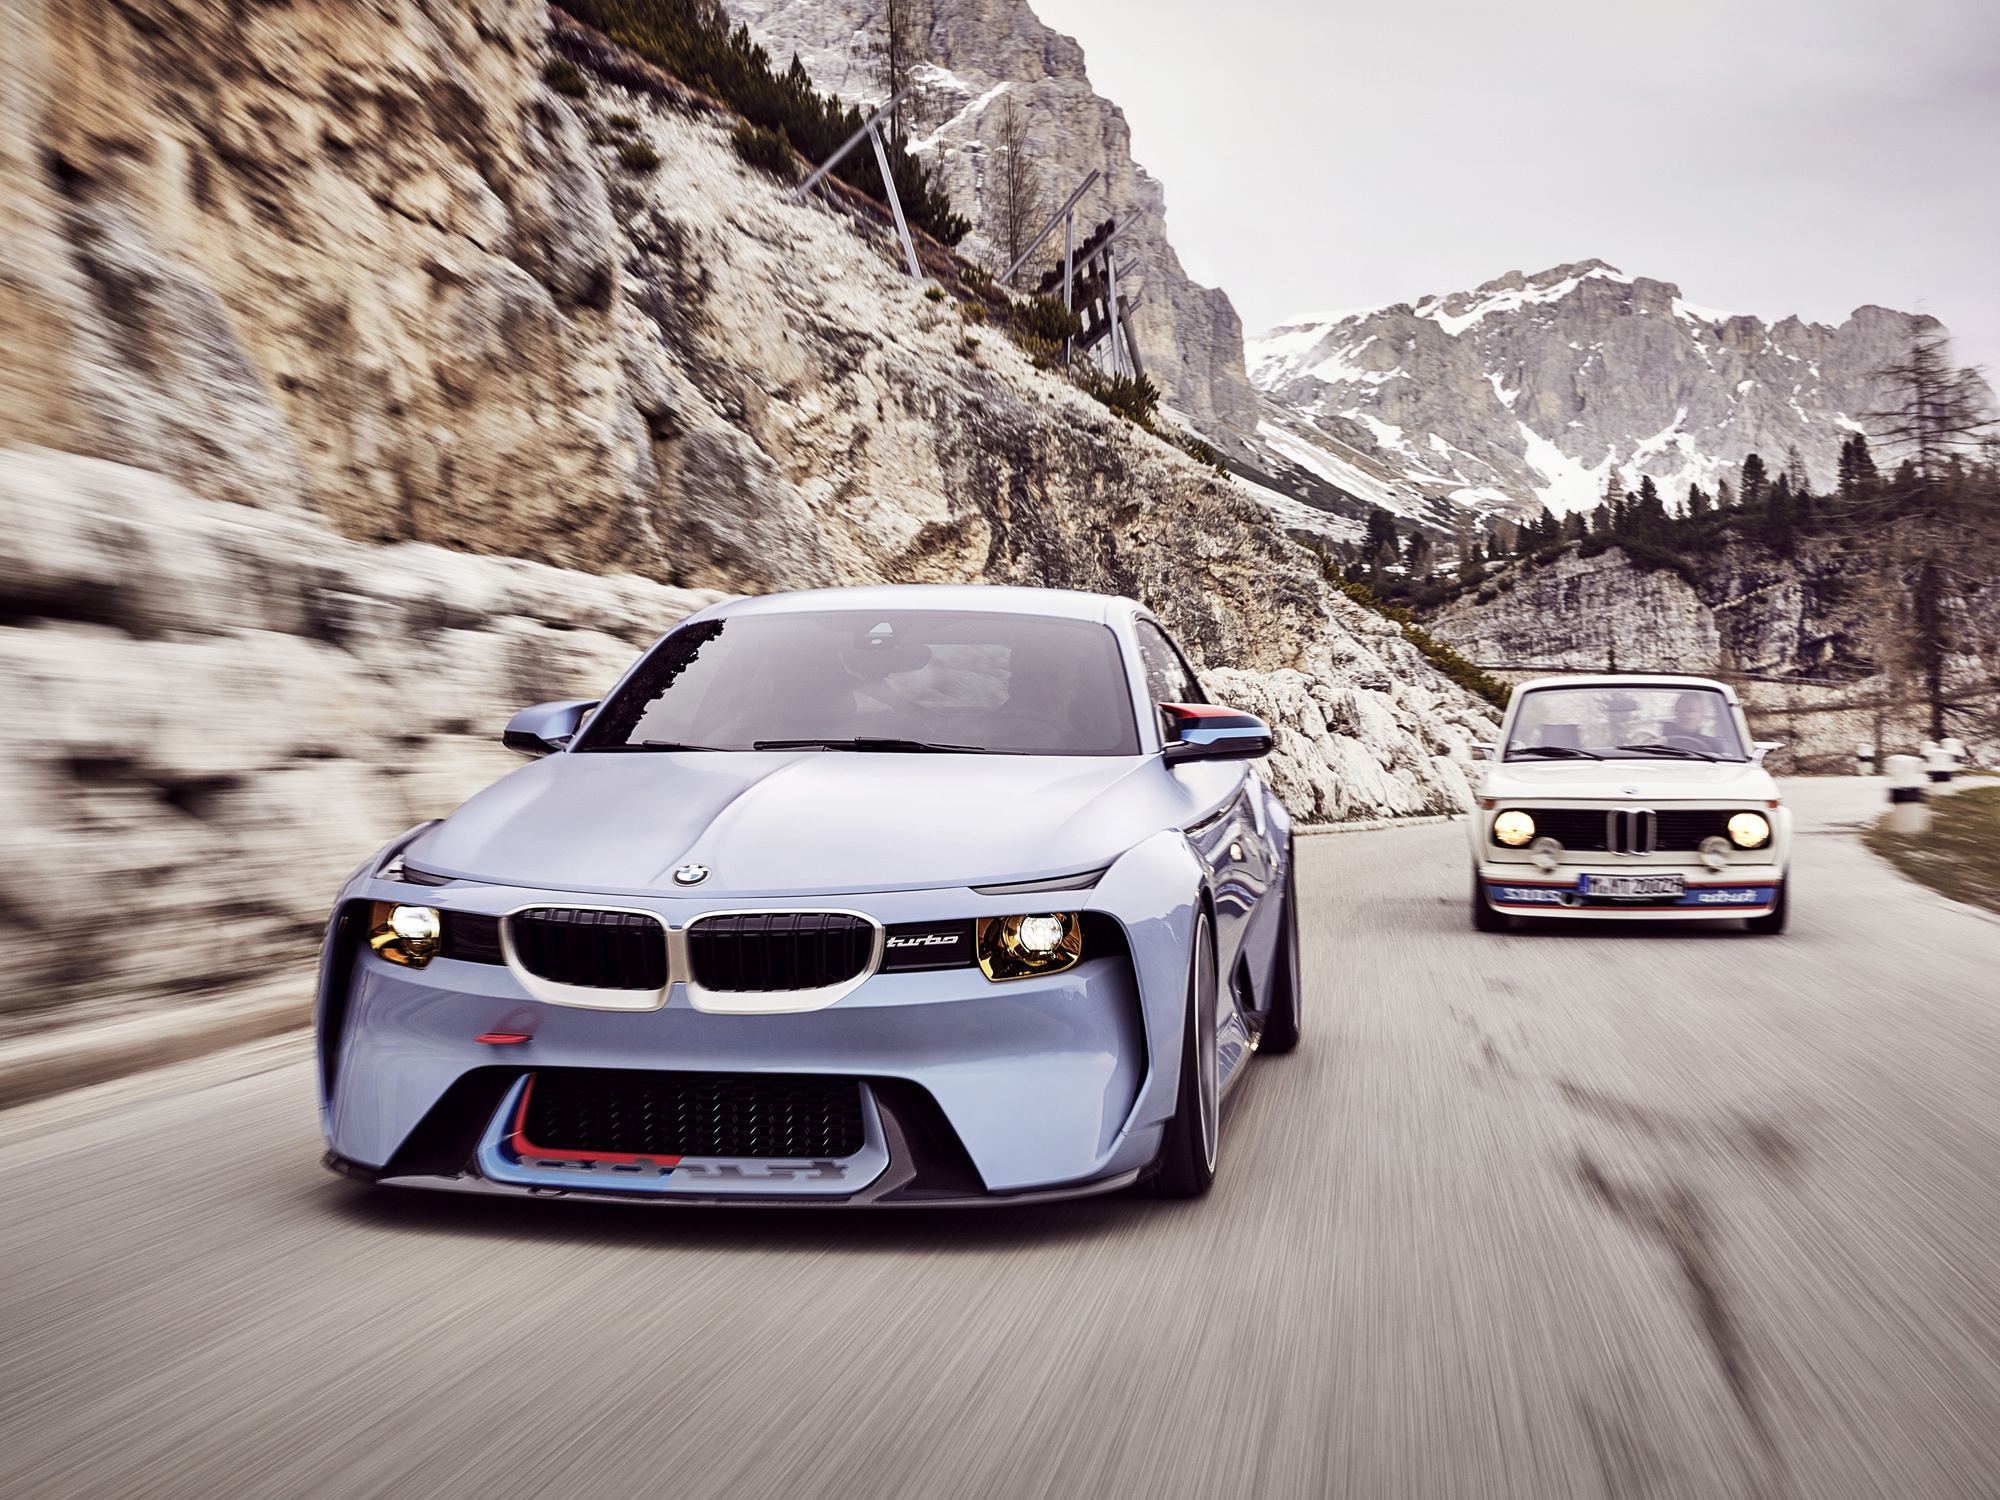 BMW 2002 Hommage Wallpapers HD